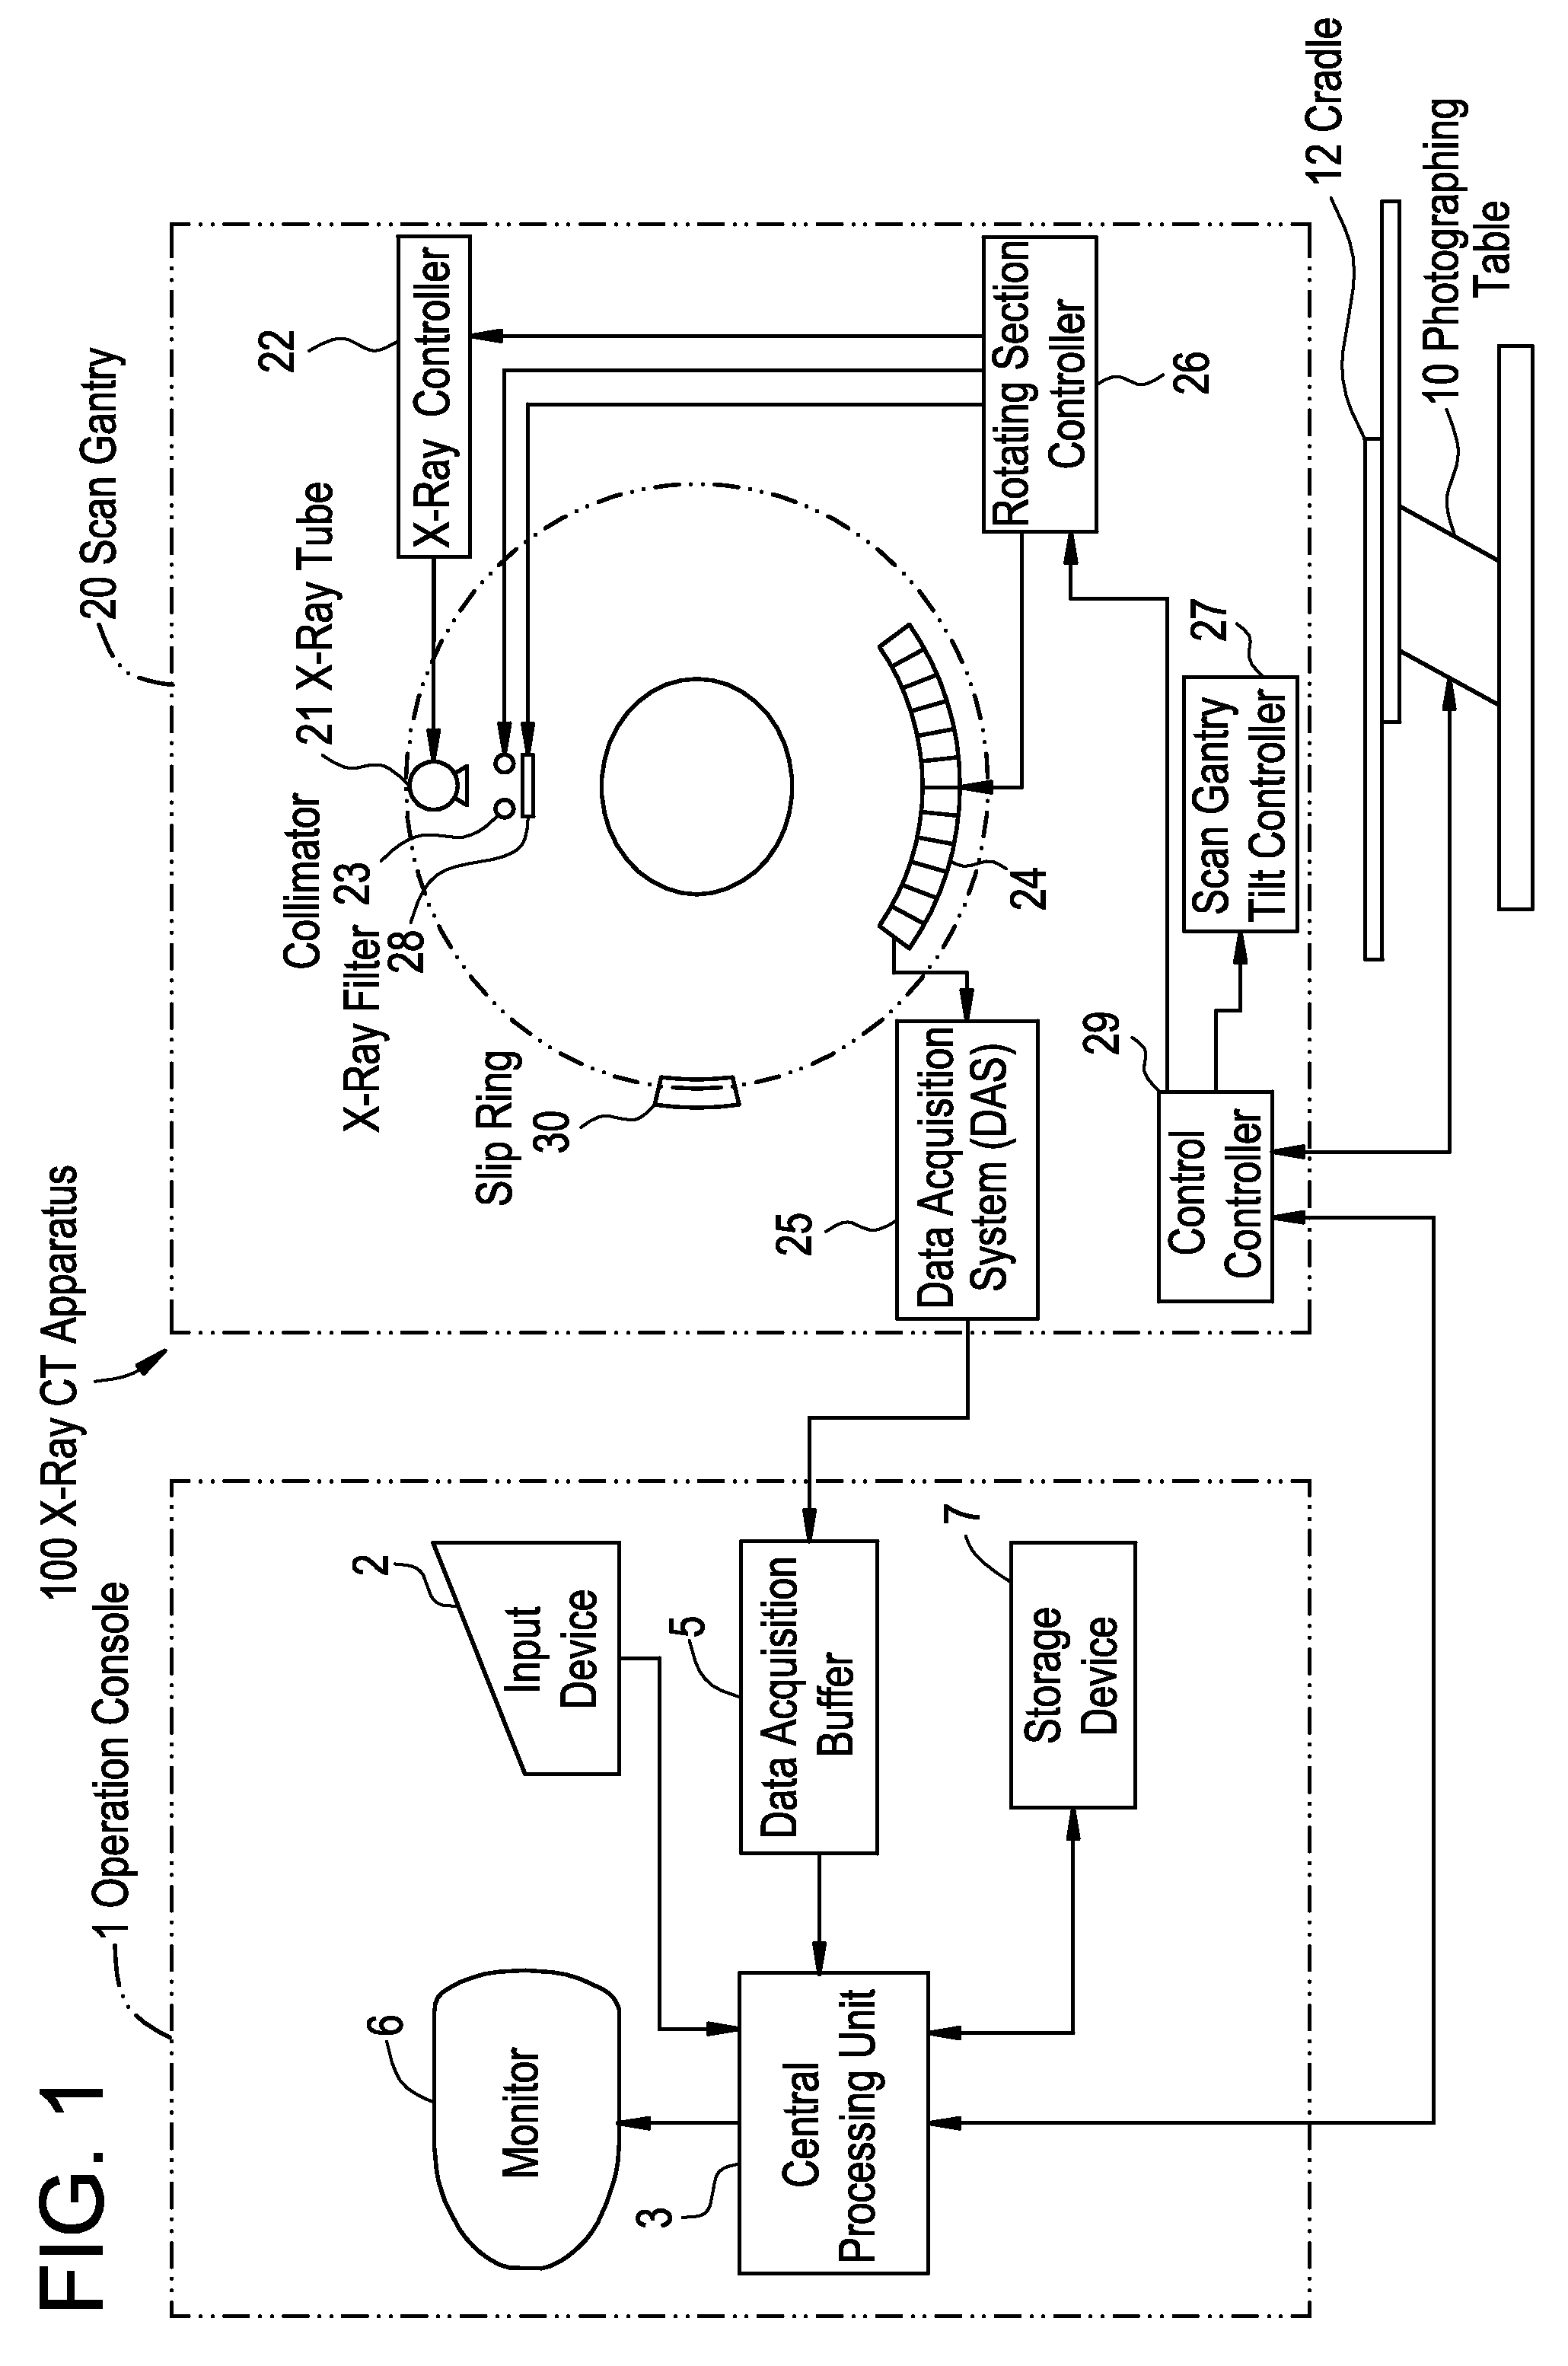 X-ray ct apparatus and x-ray ct scanning method